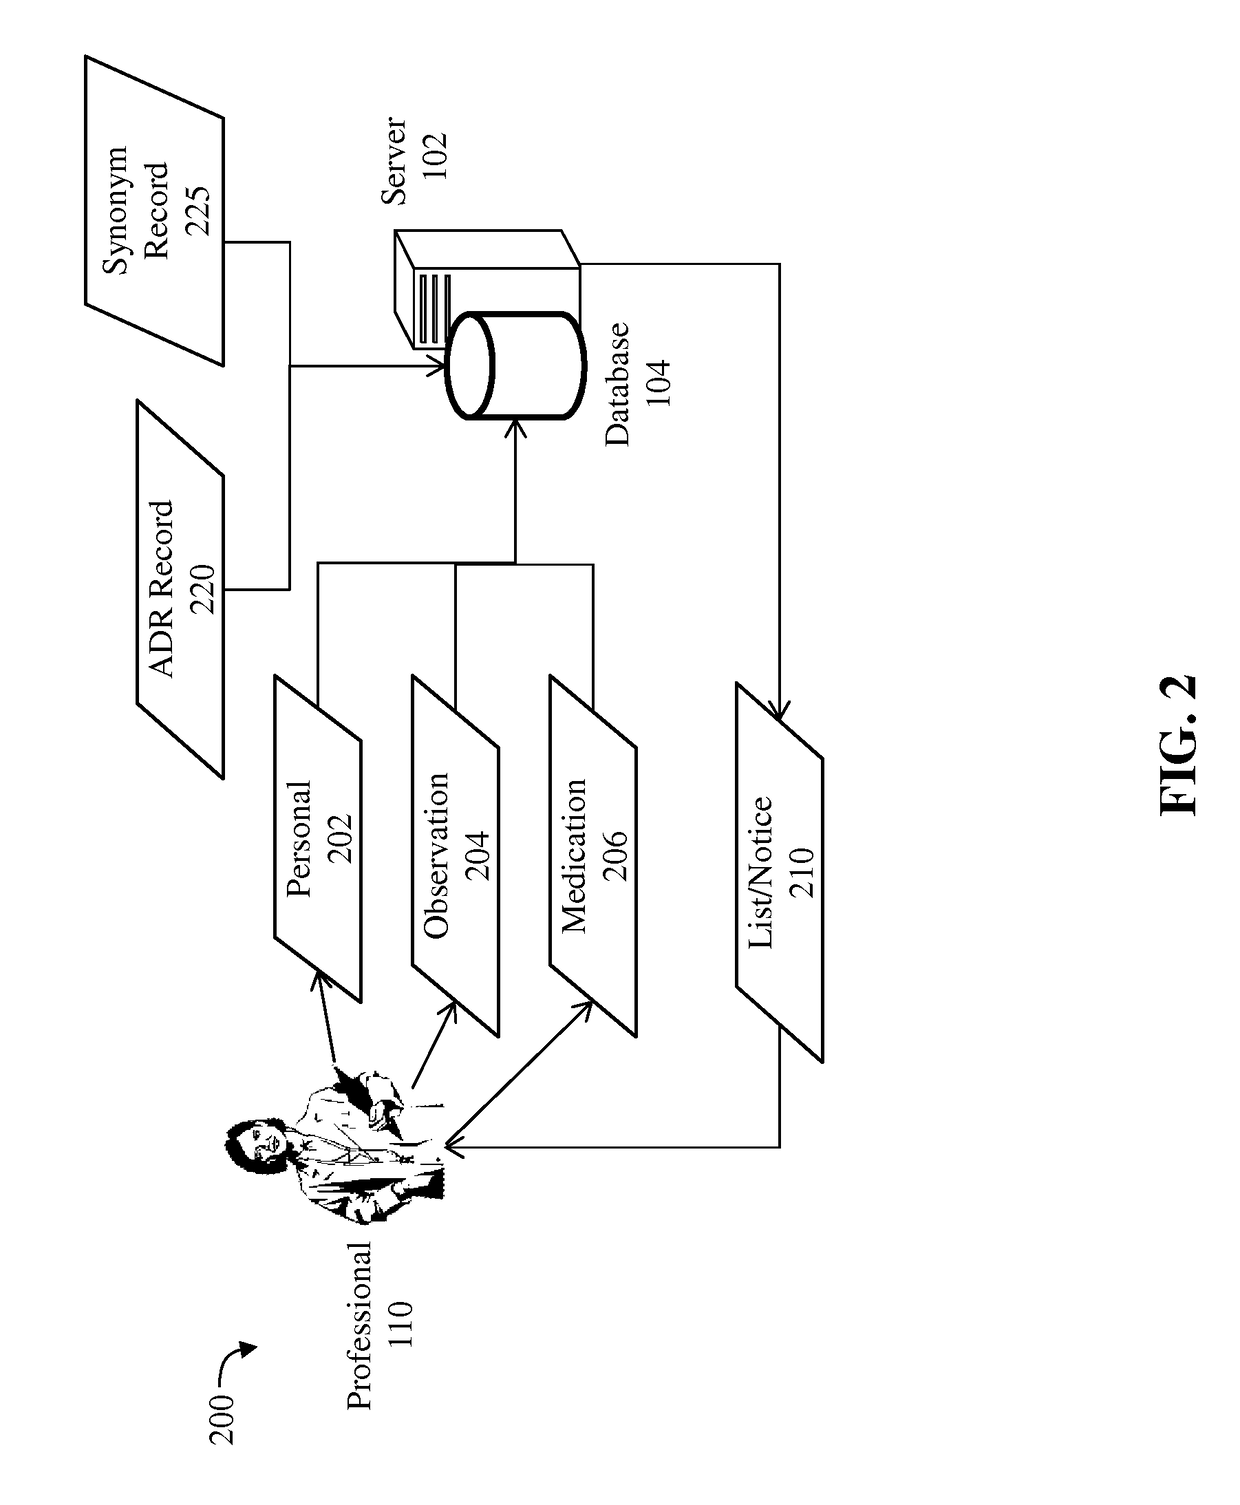 Detection of adverse reactions to medication using a communications network